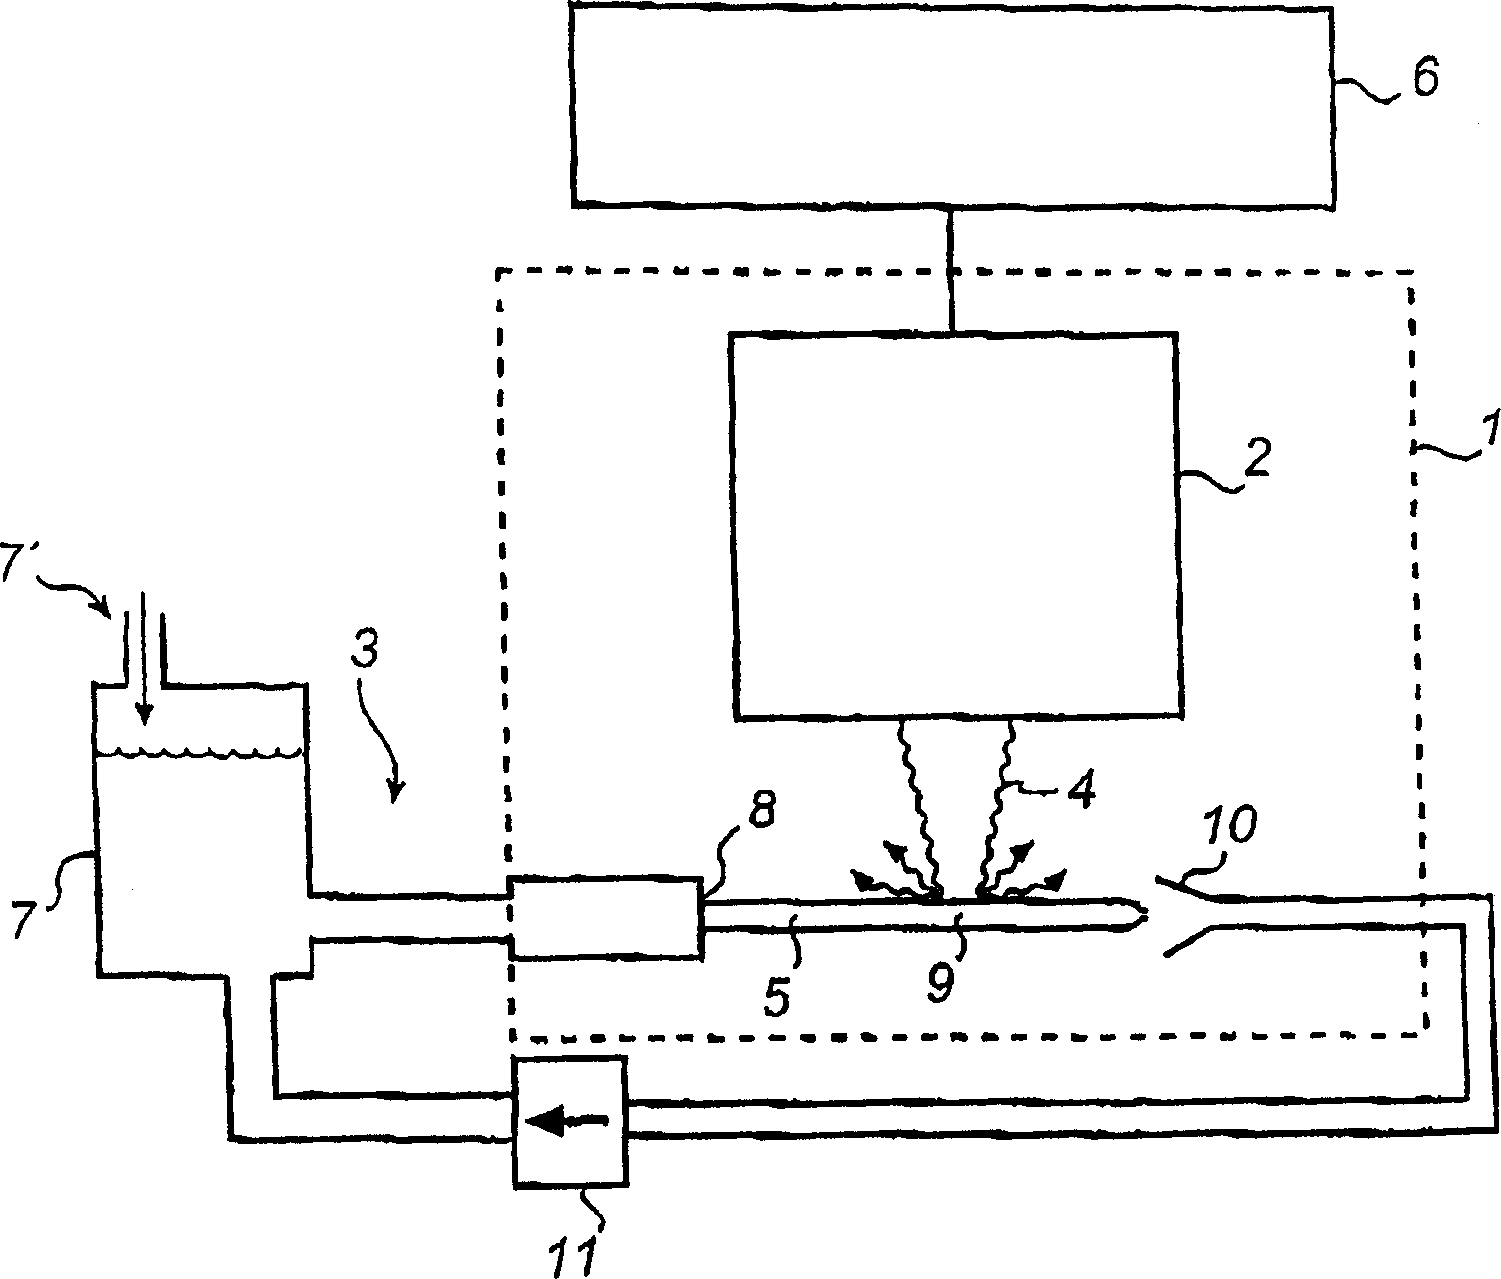 Method and apparatus for generating X-ray or EUV radiation